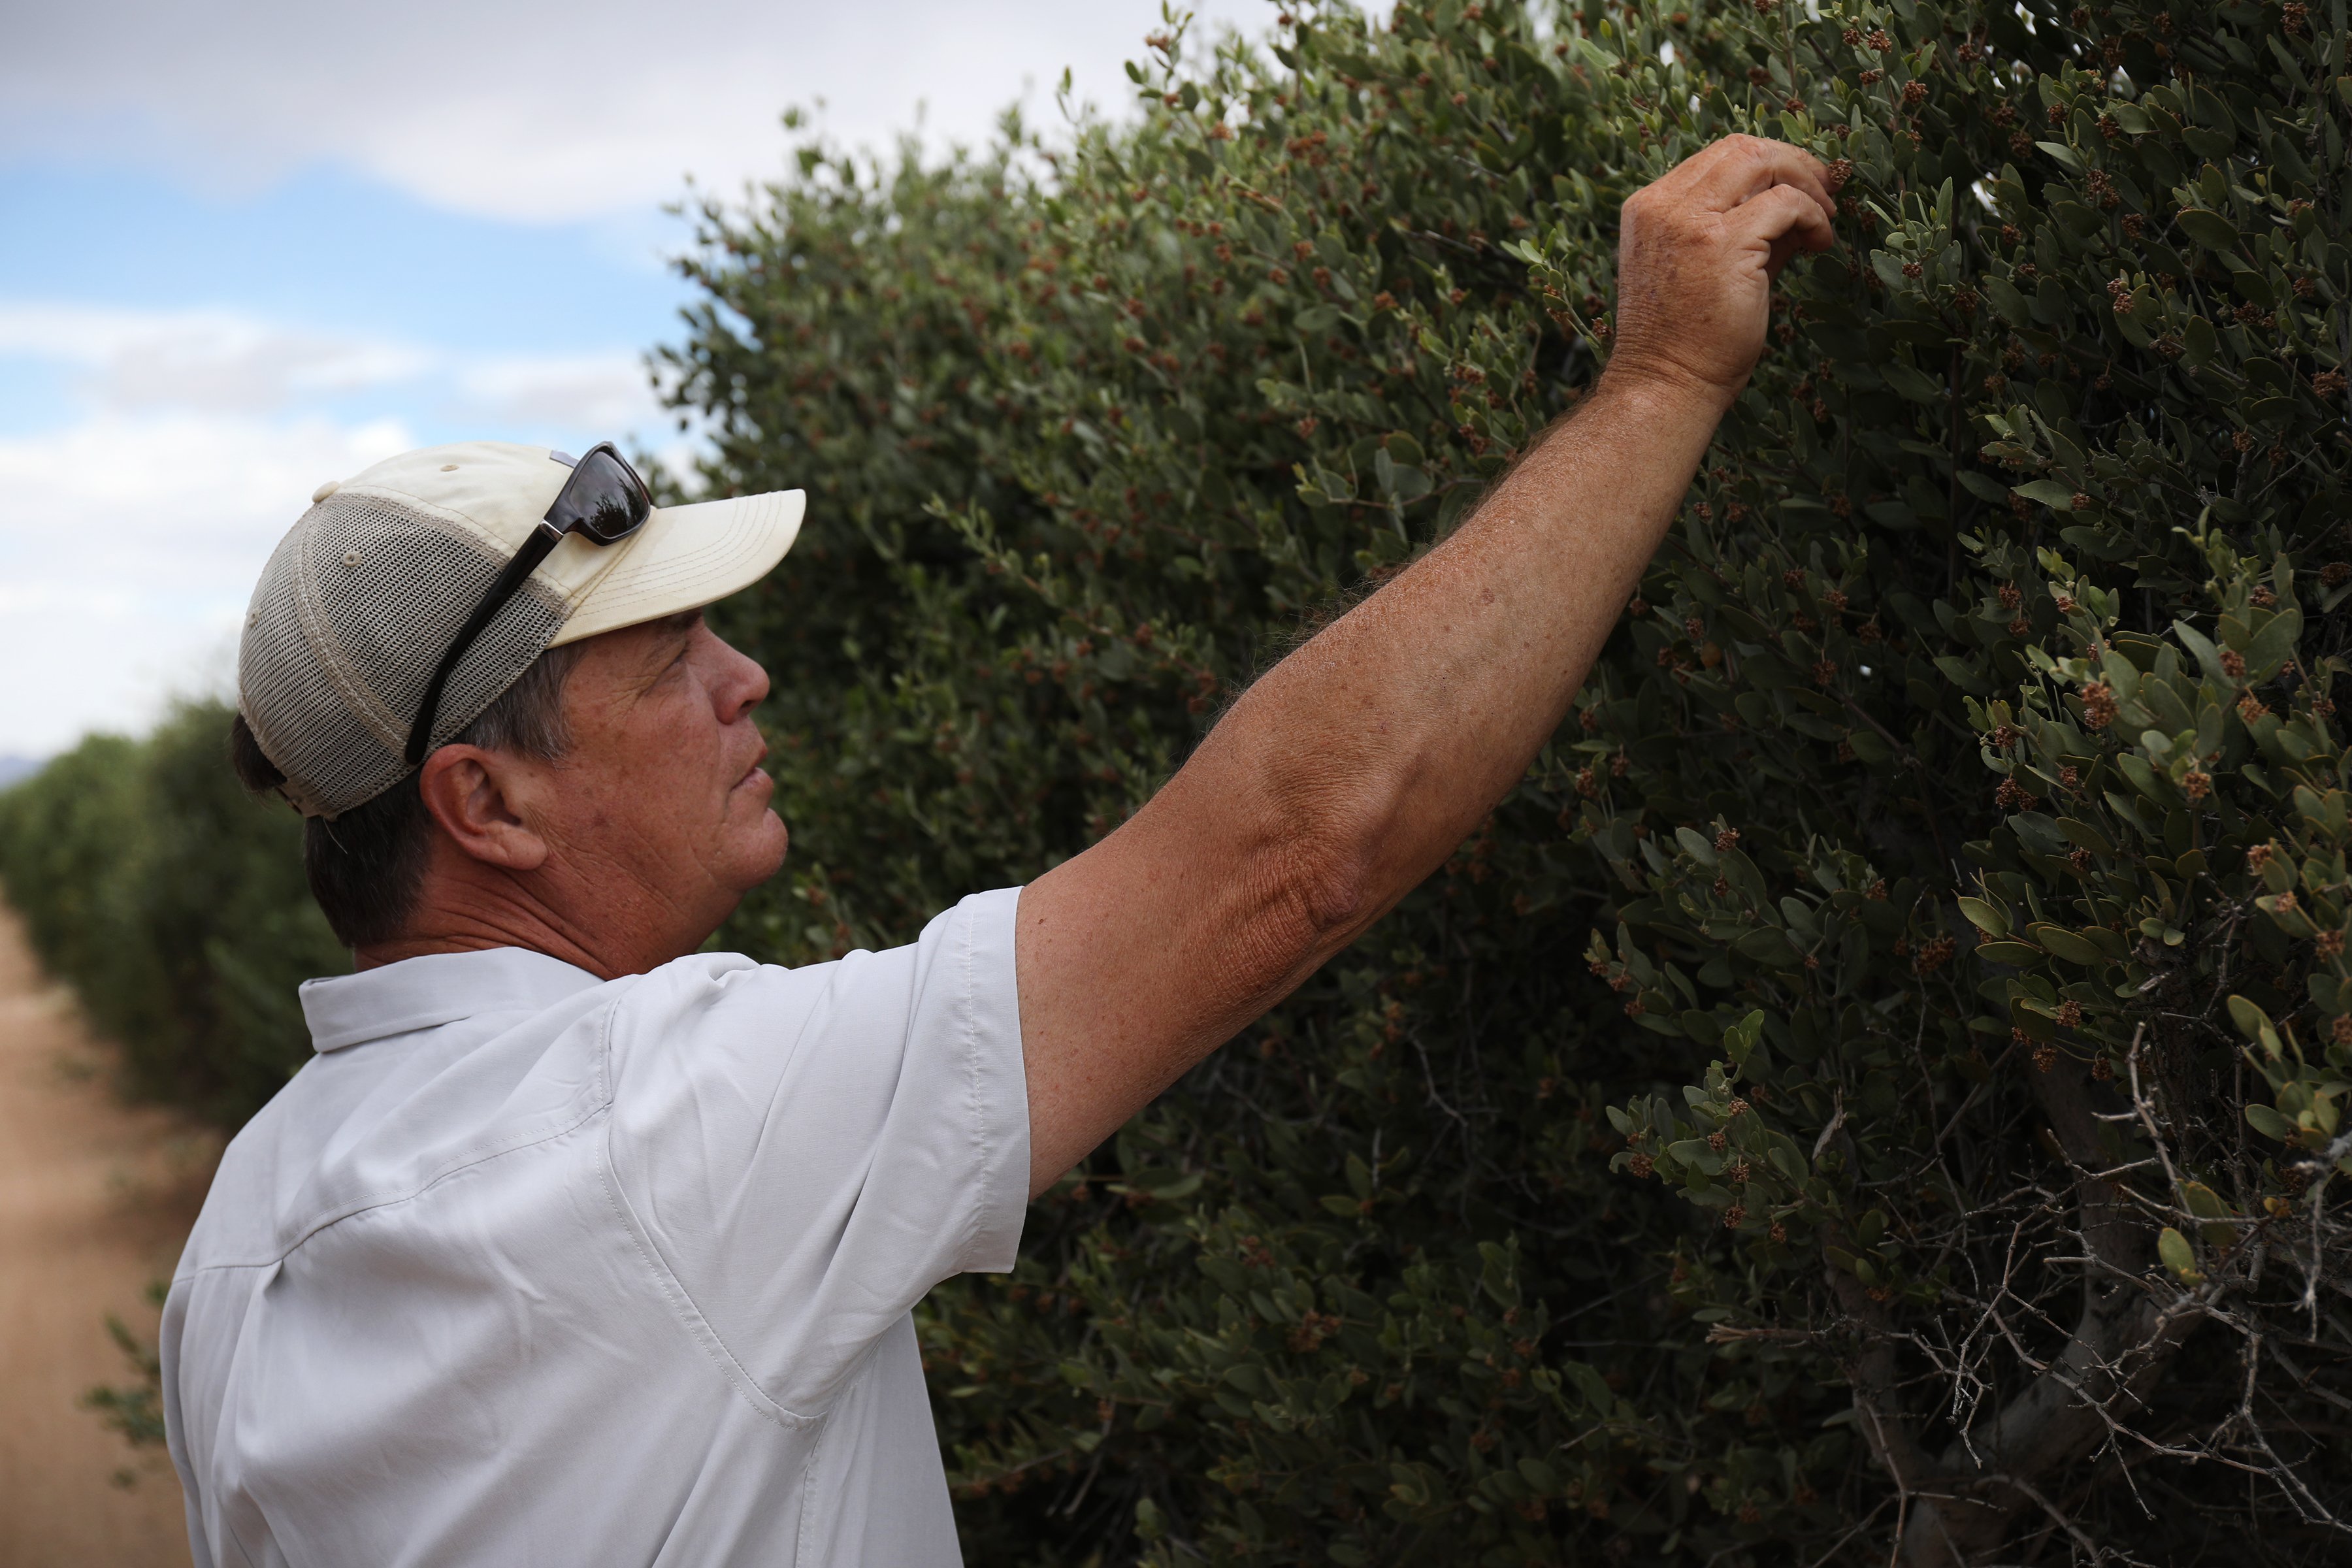 Chip is a jojoba farmer in Arizona. He's inspecting his shrubs which are beginning to fruit under the hot Arizona sun. 